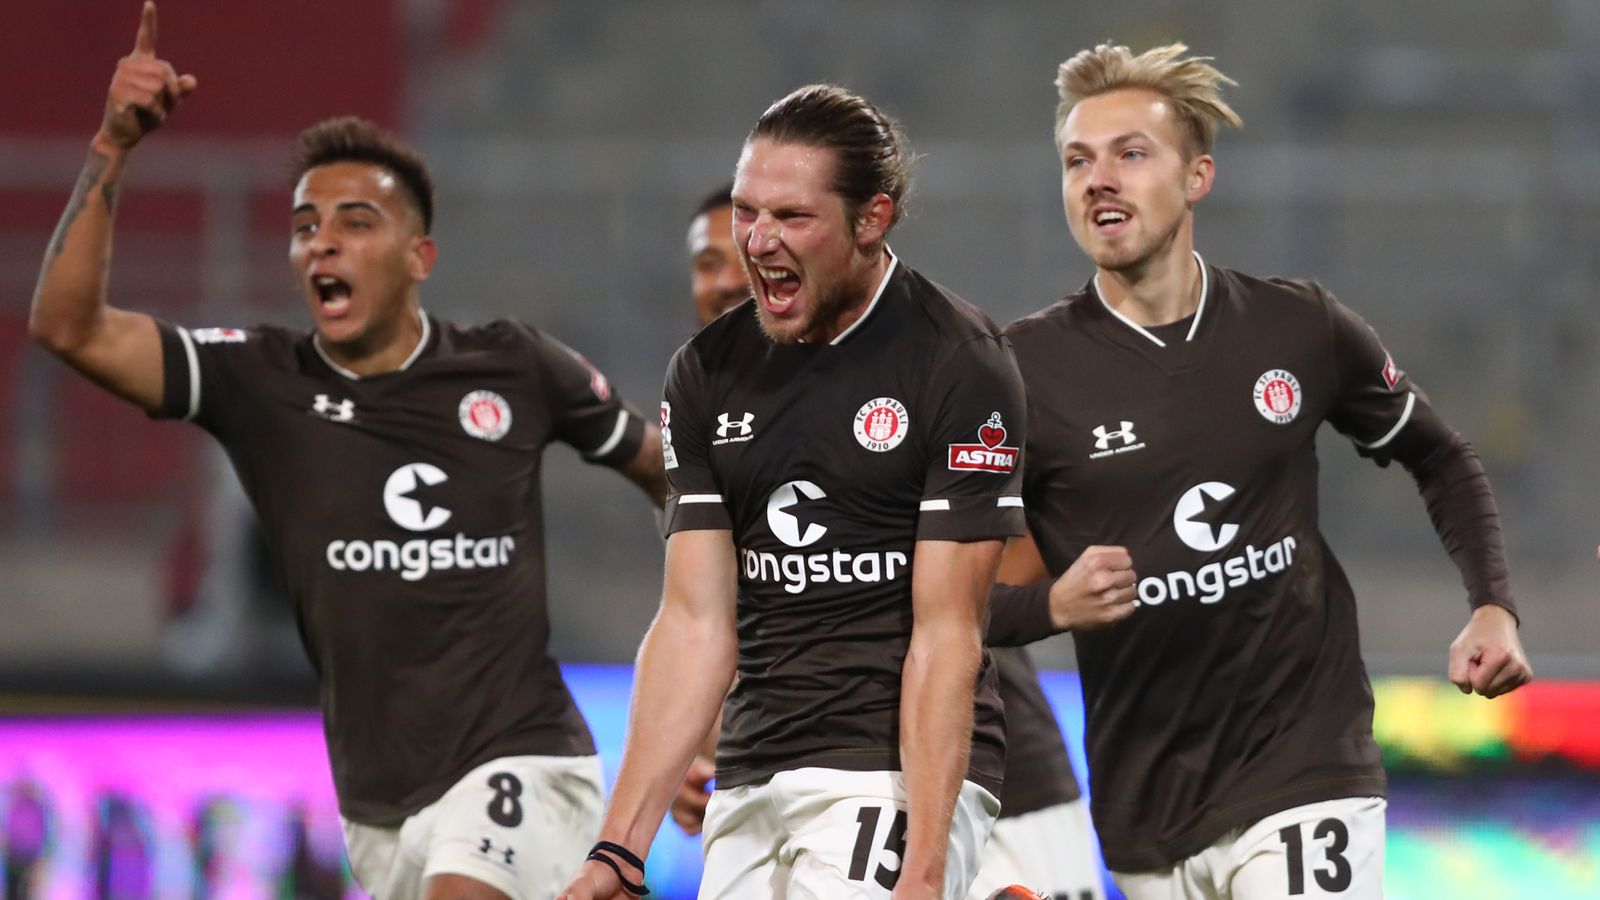 The New St. Pauli Jerseys Will be Produced Sustainably In-House